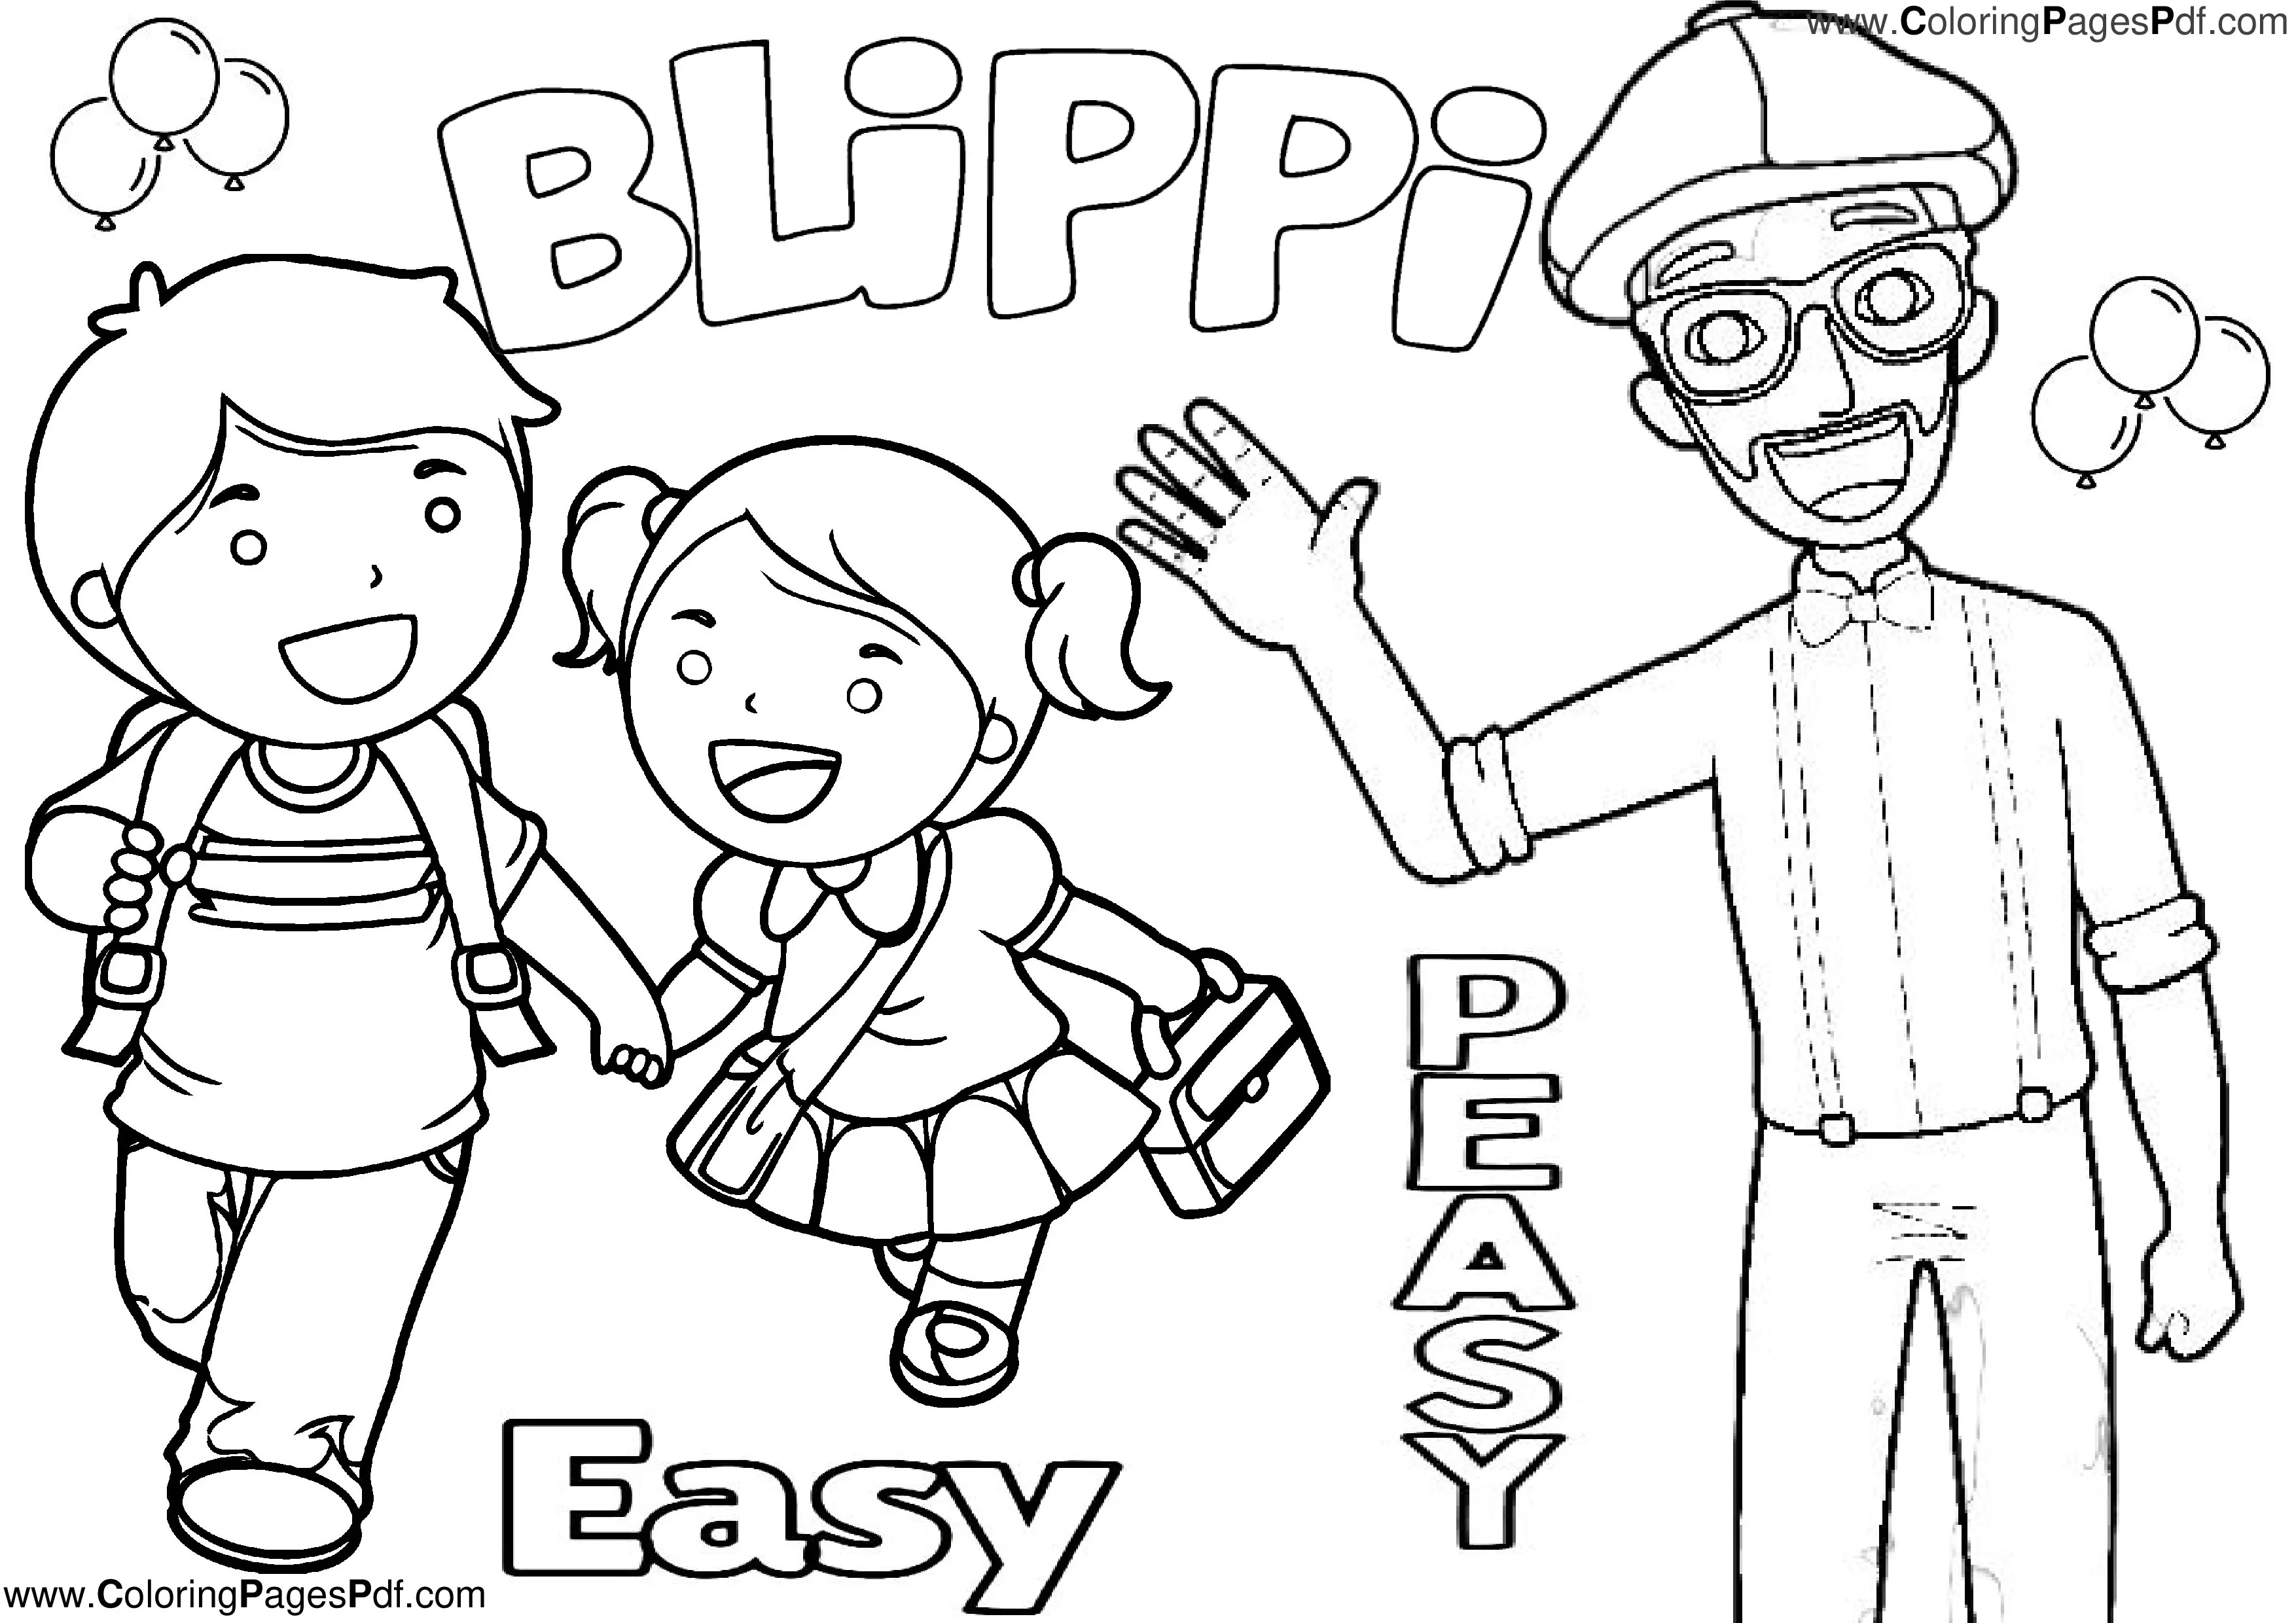 Blippi coloring pages for kids